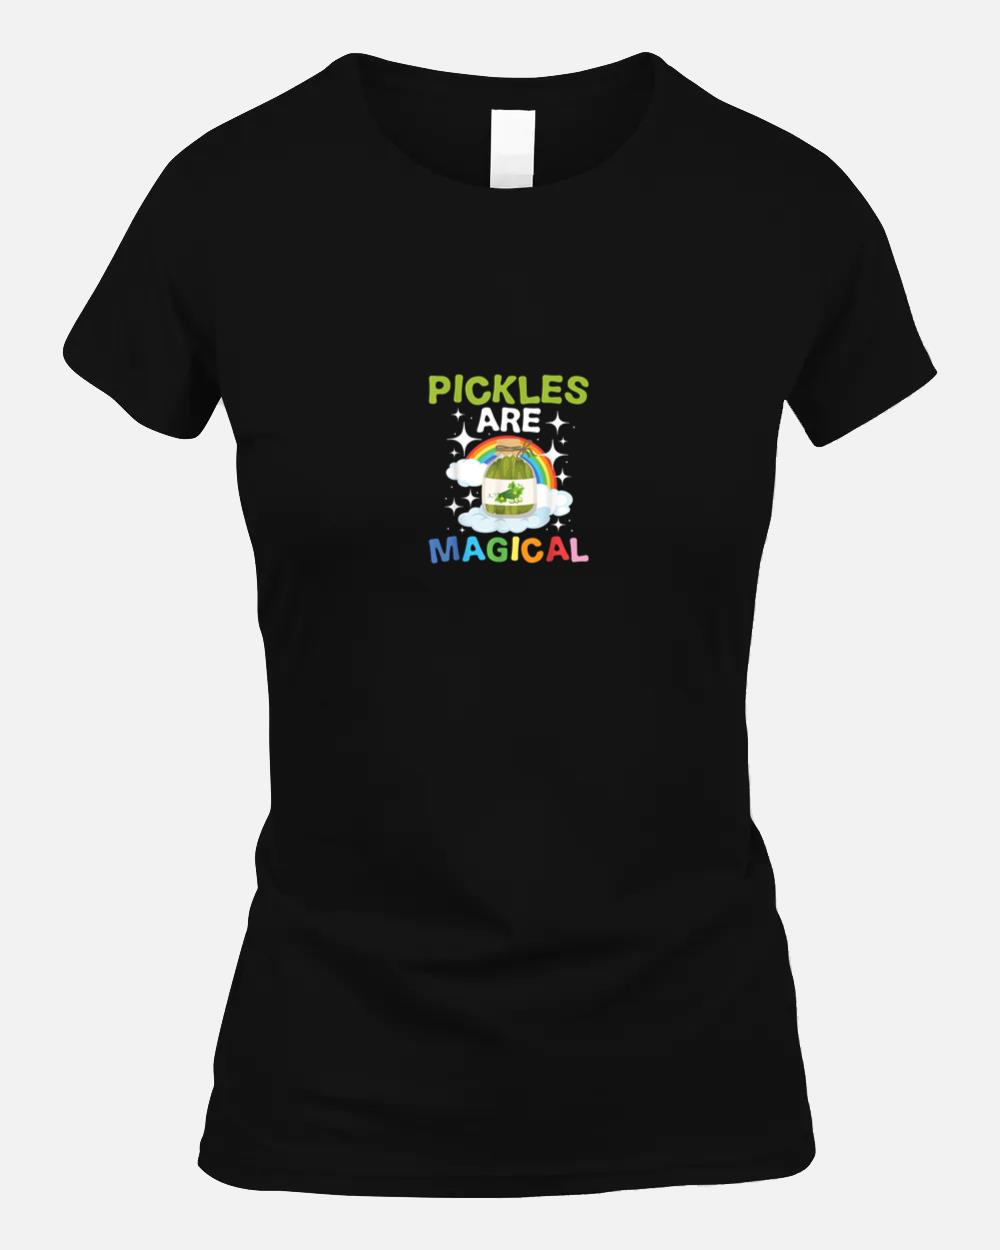 Pickles Are Magical - Pickle Vegetarian Vegetable Farming Unisex T-Shirt